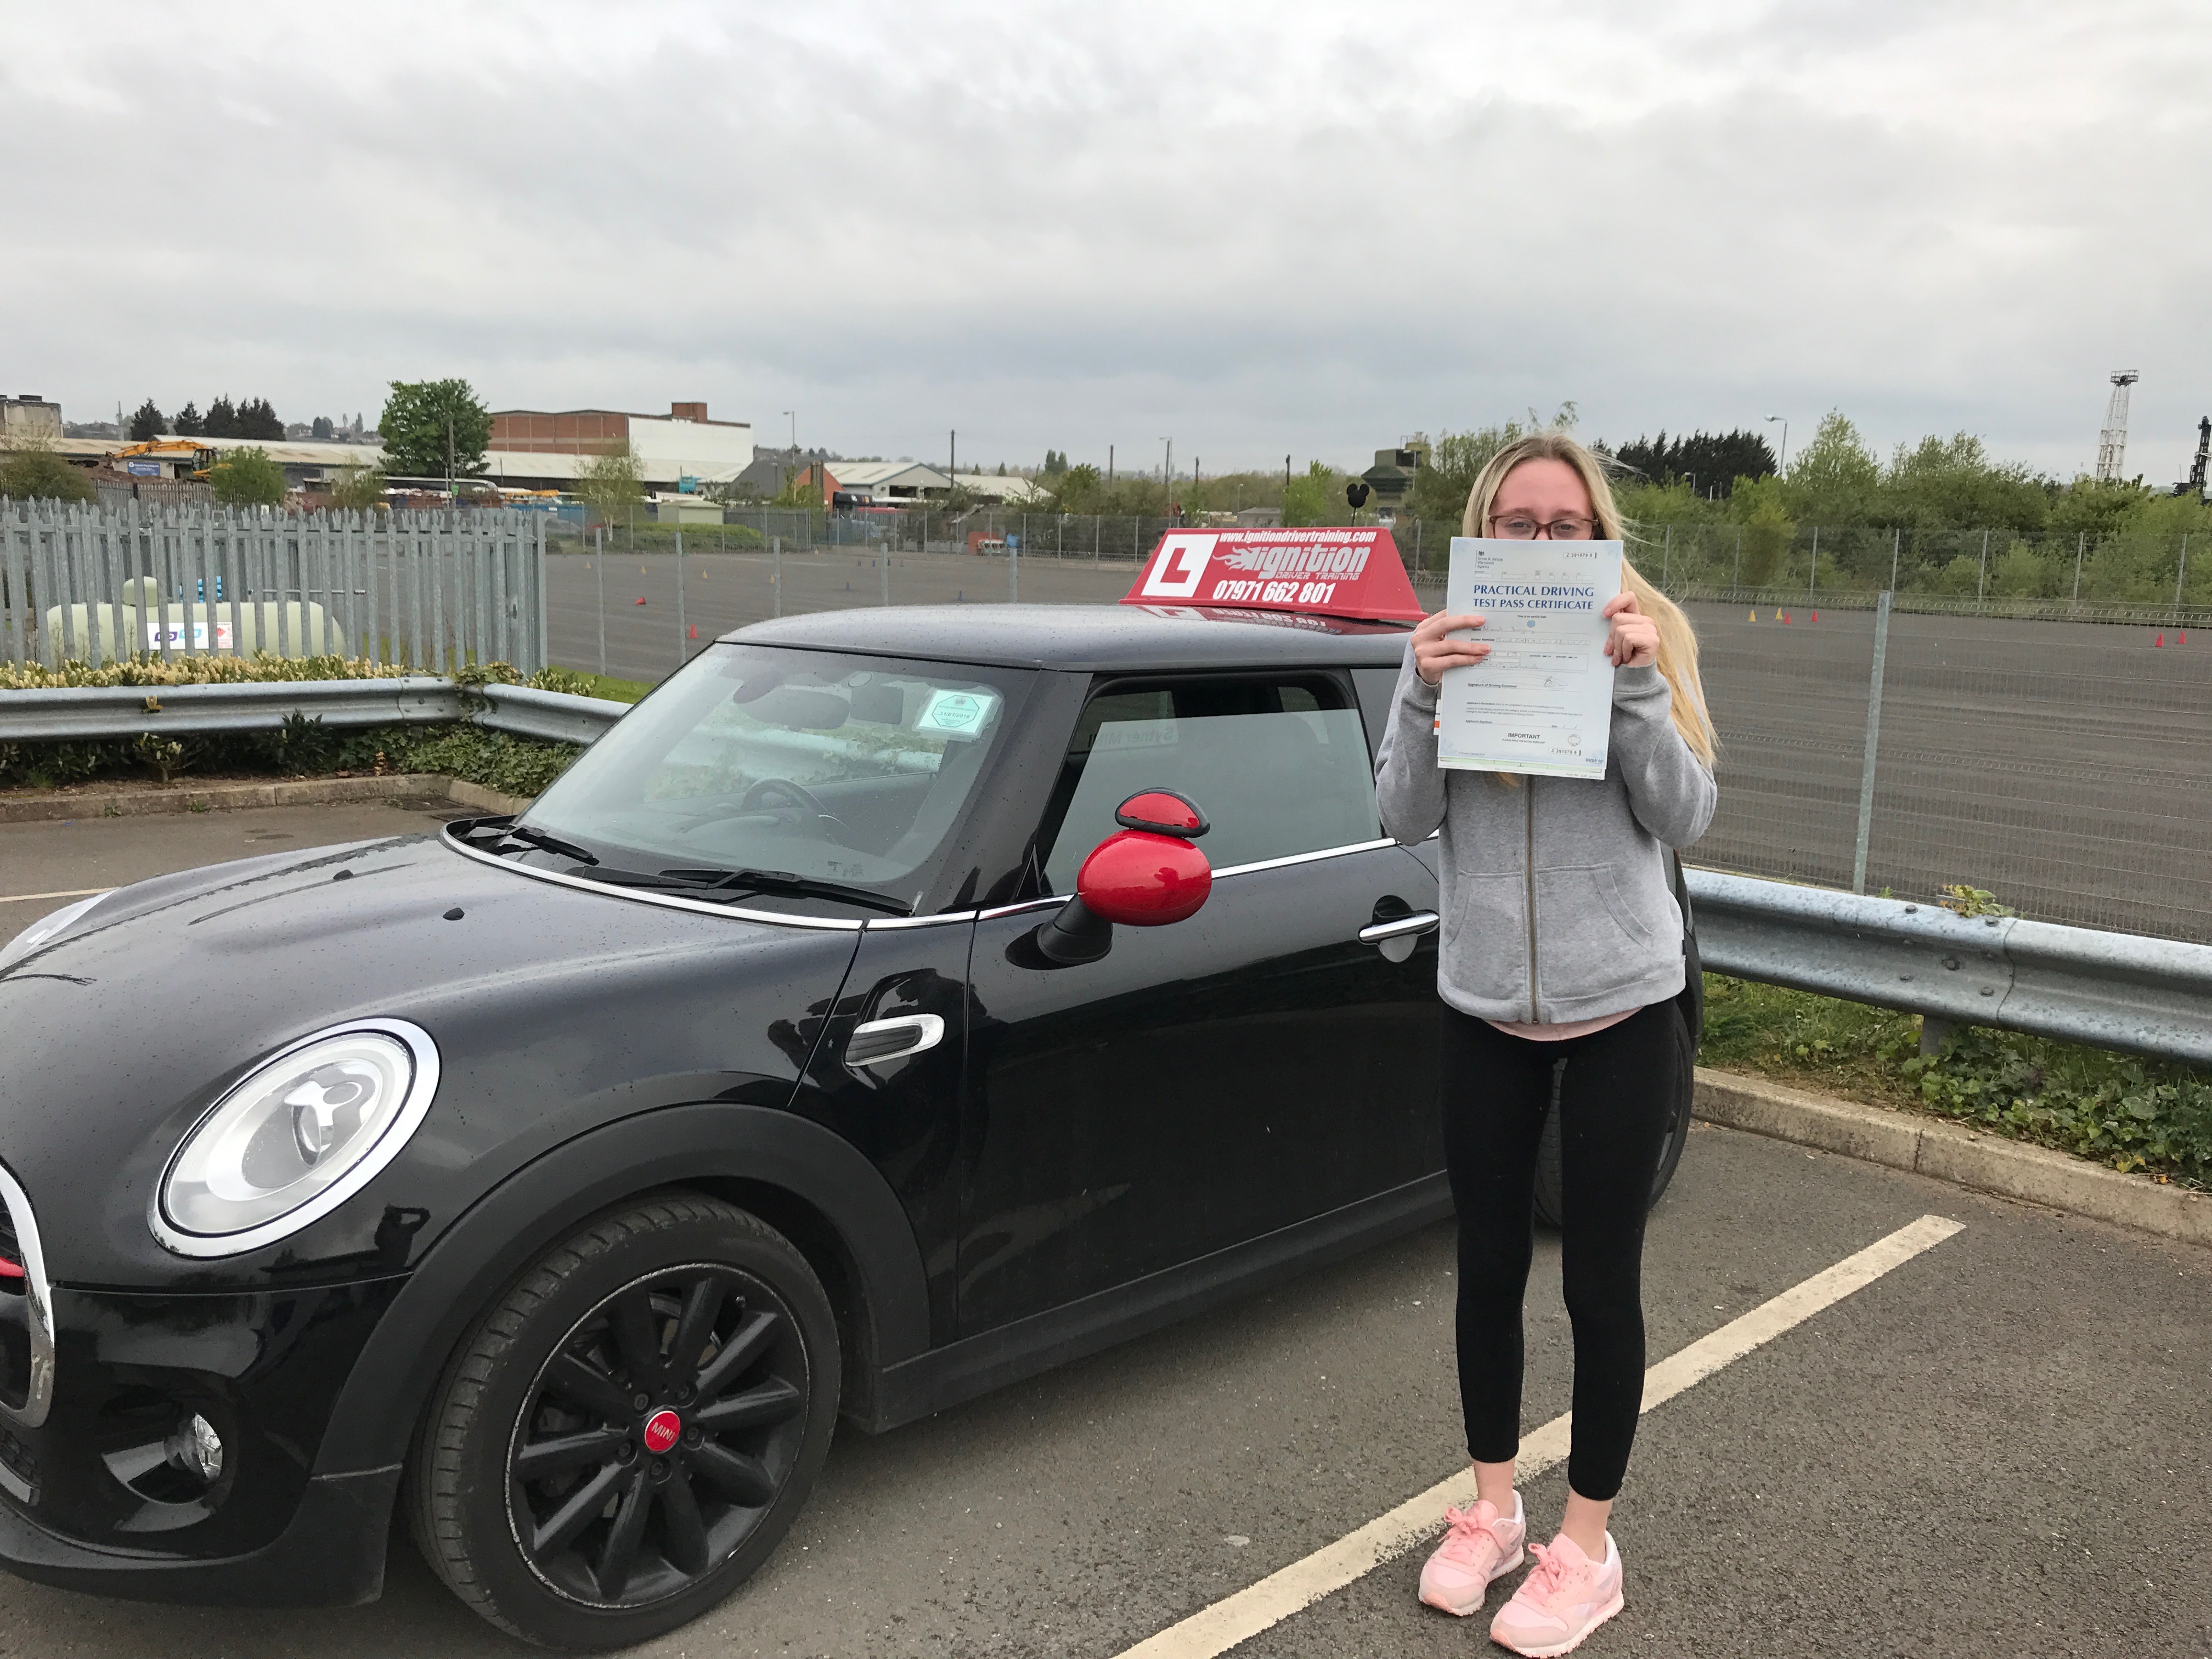 Its a first time pass for Niamh!